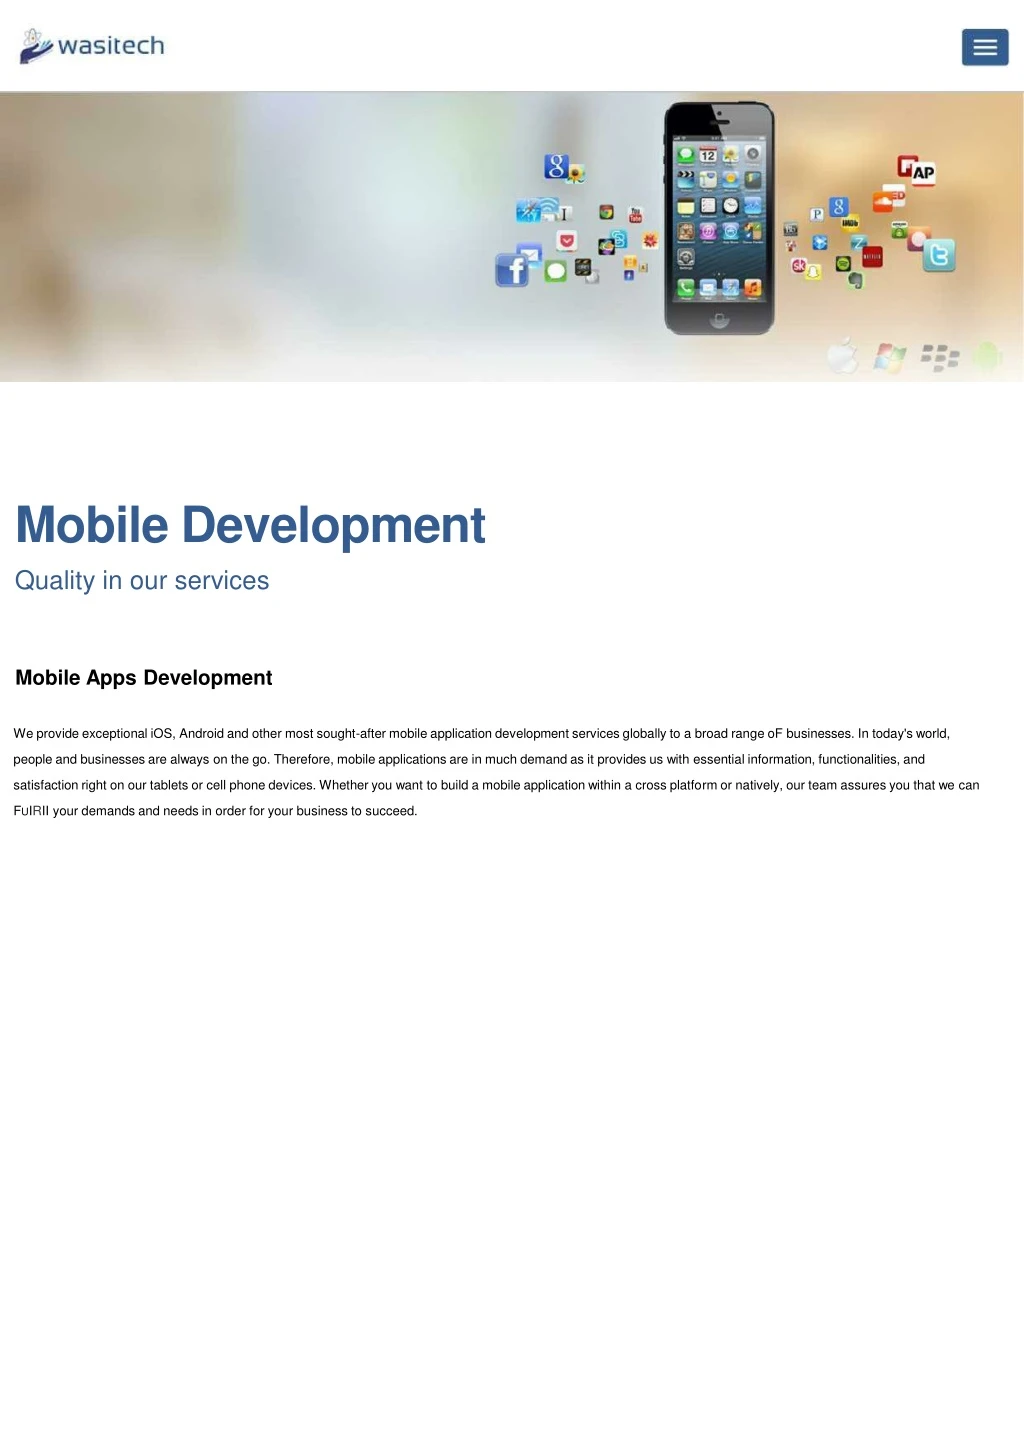 mobile development quality in our services